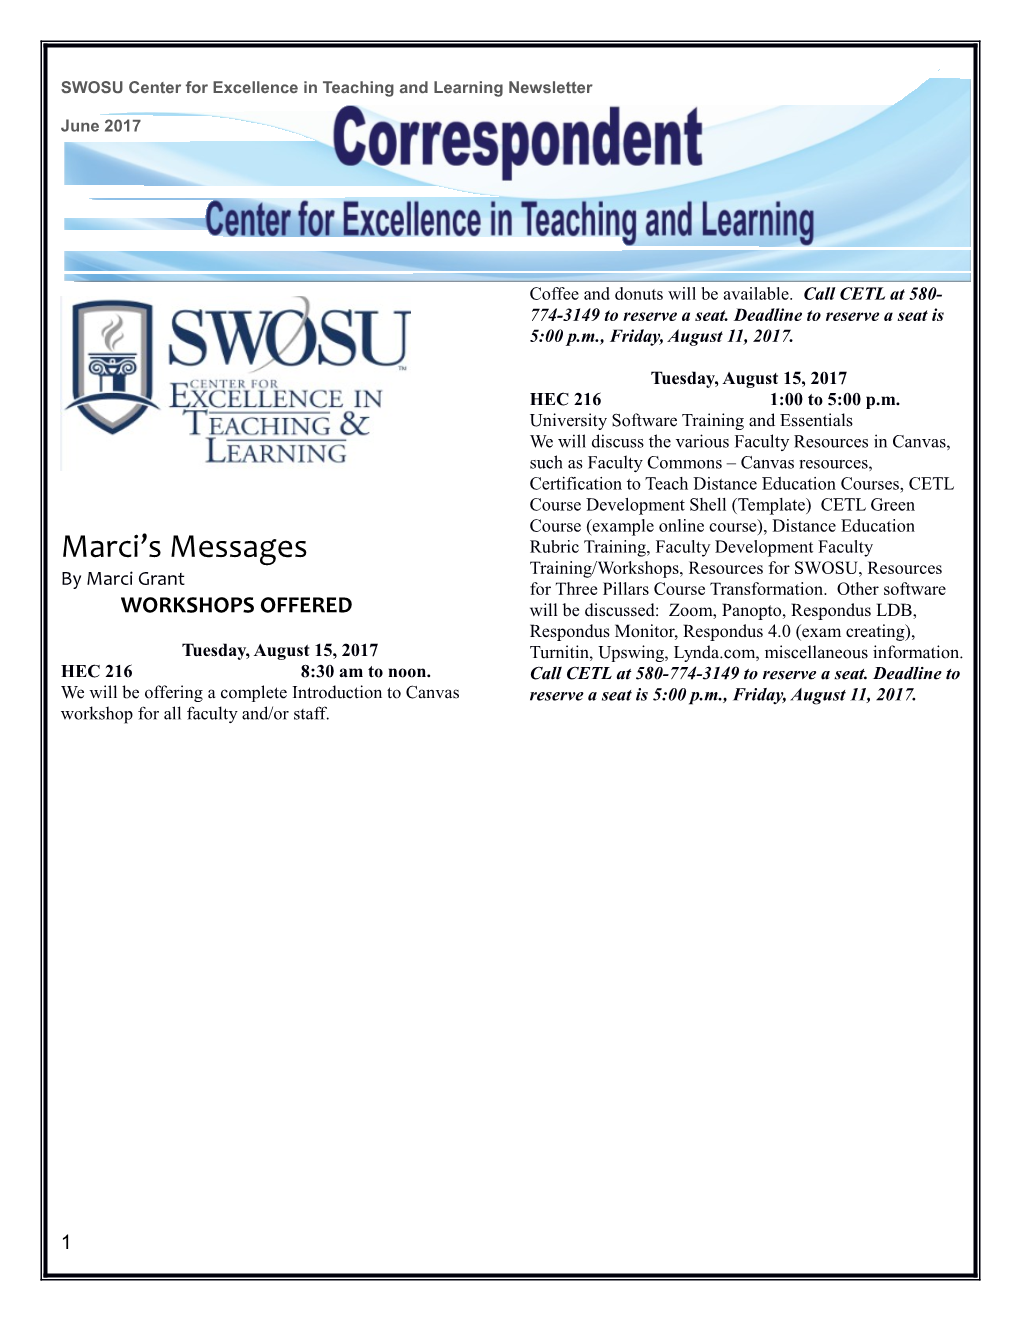 SWOSU Center for Excellence in Teaching and Learning Newsletterjune 2017